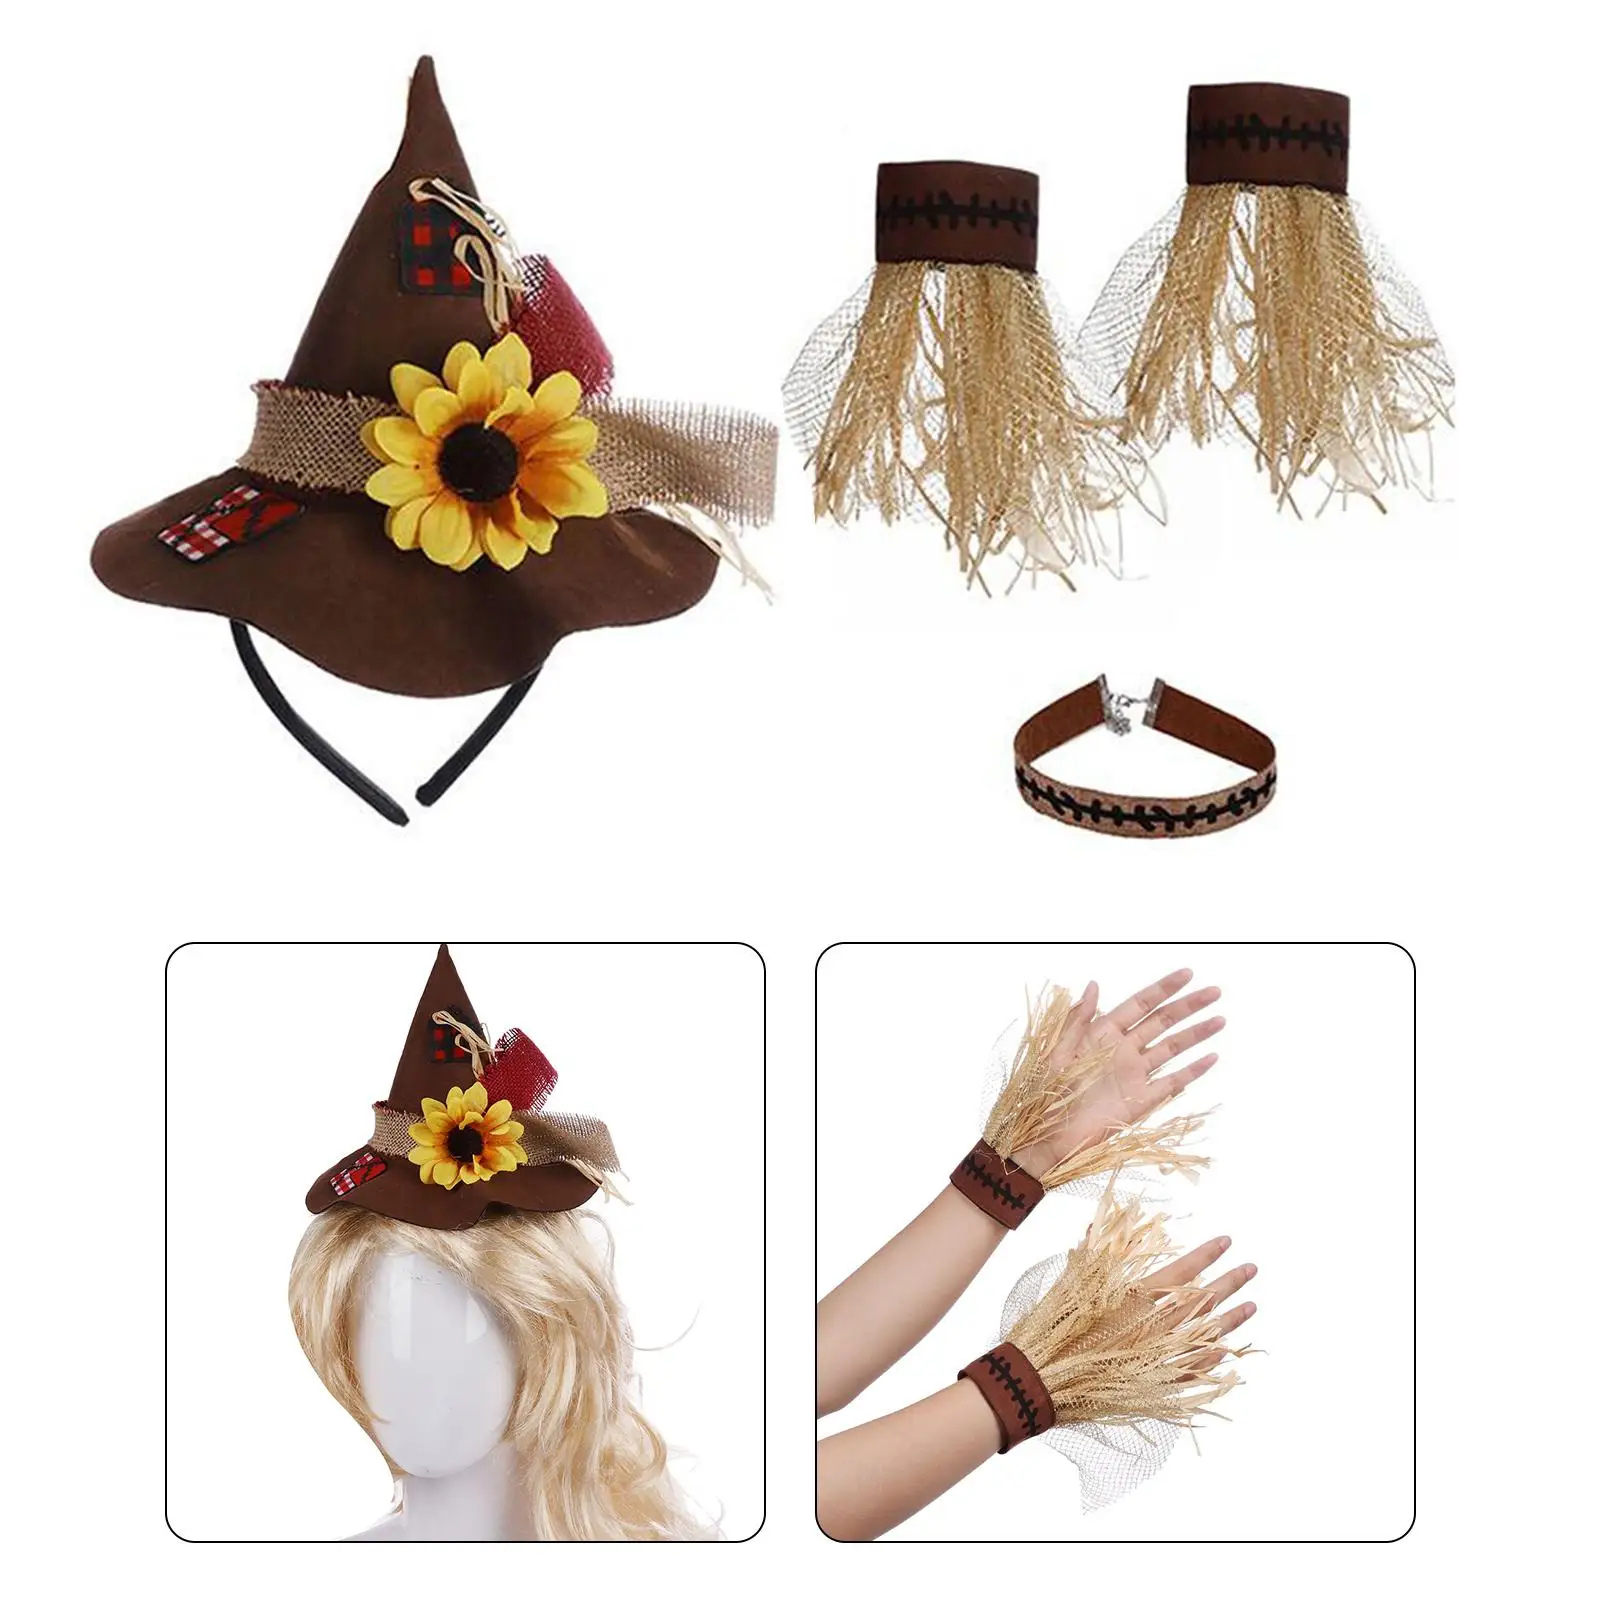 Novelty Halloween Party Costume Hat Necklace Gloves Cosplay Costume Props for Carnival Cosplay Masquerade Festival Decoration